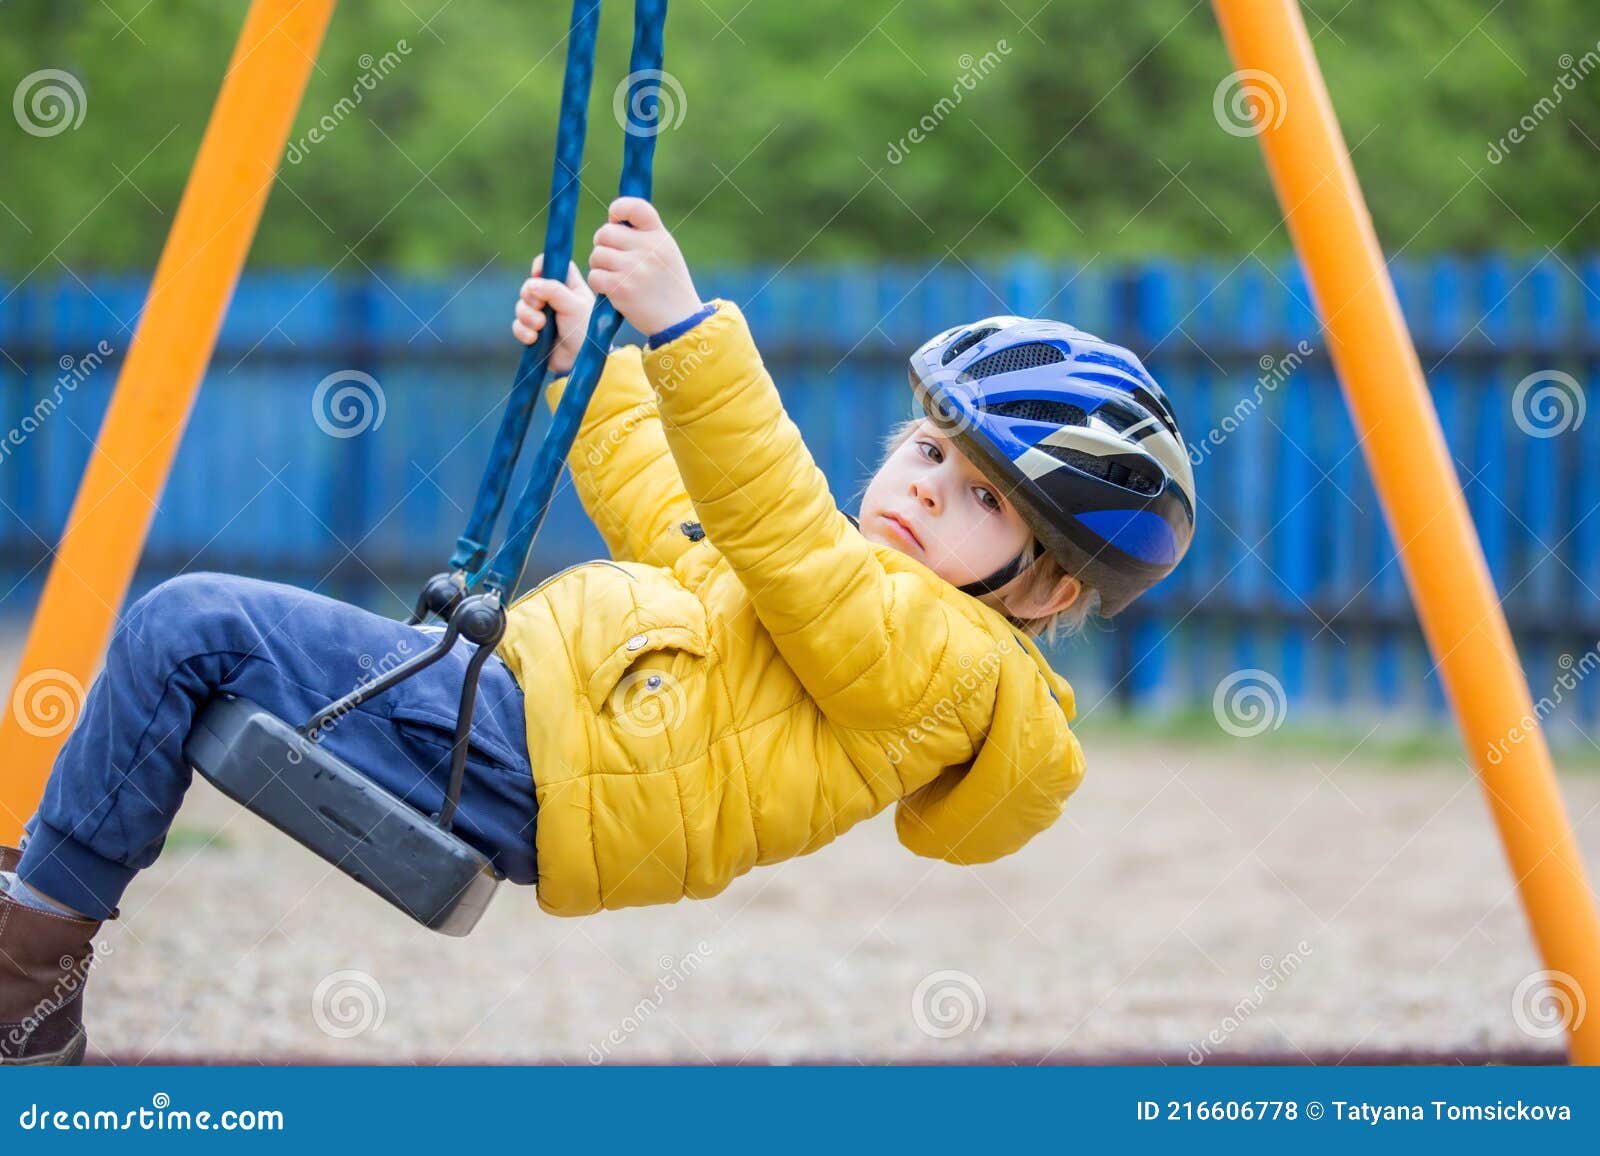 cute toddler boy, playing on the playground